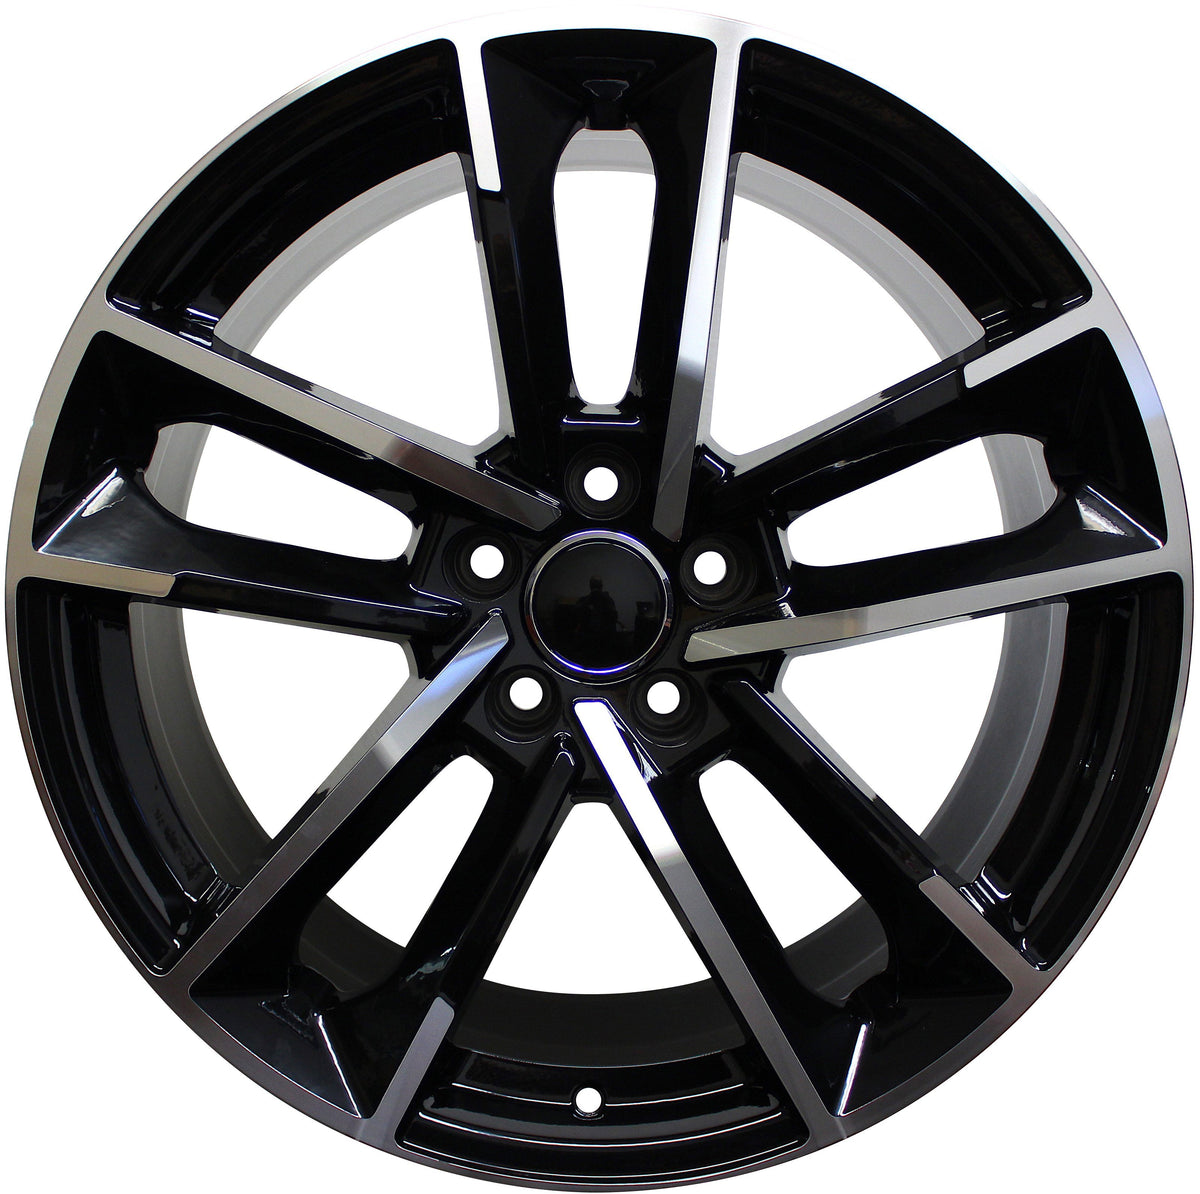 19 Inch Wheels Audi S Line Q2 Q3 Q5 S4 S5 S6 A4 A5 A6 A7 Black Machined Rims S5 Style